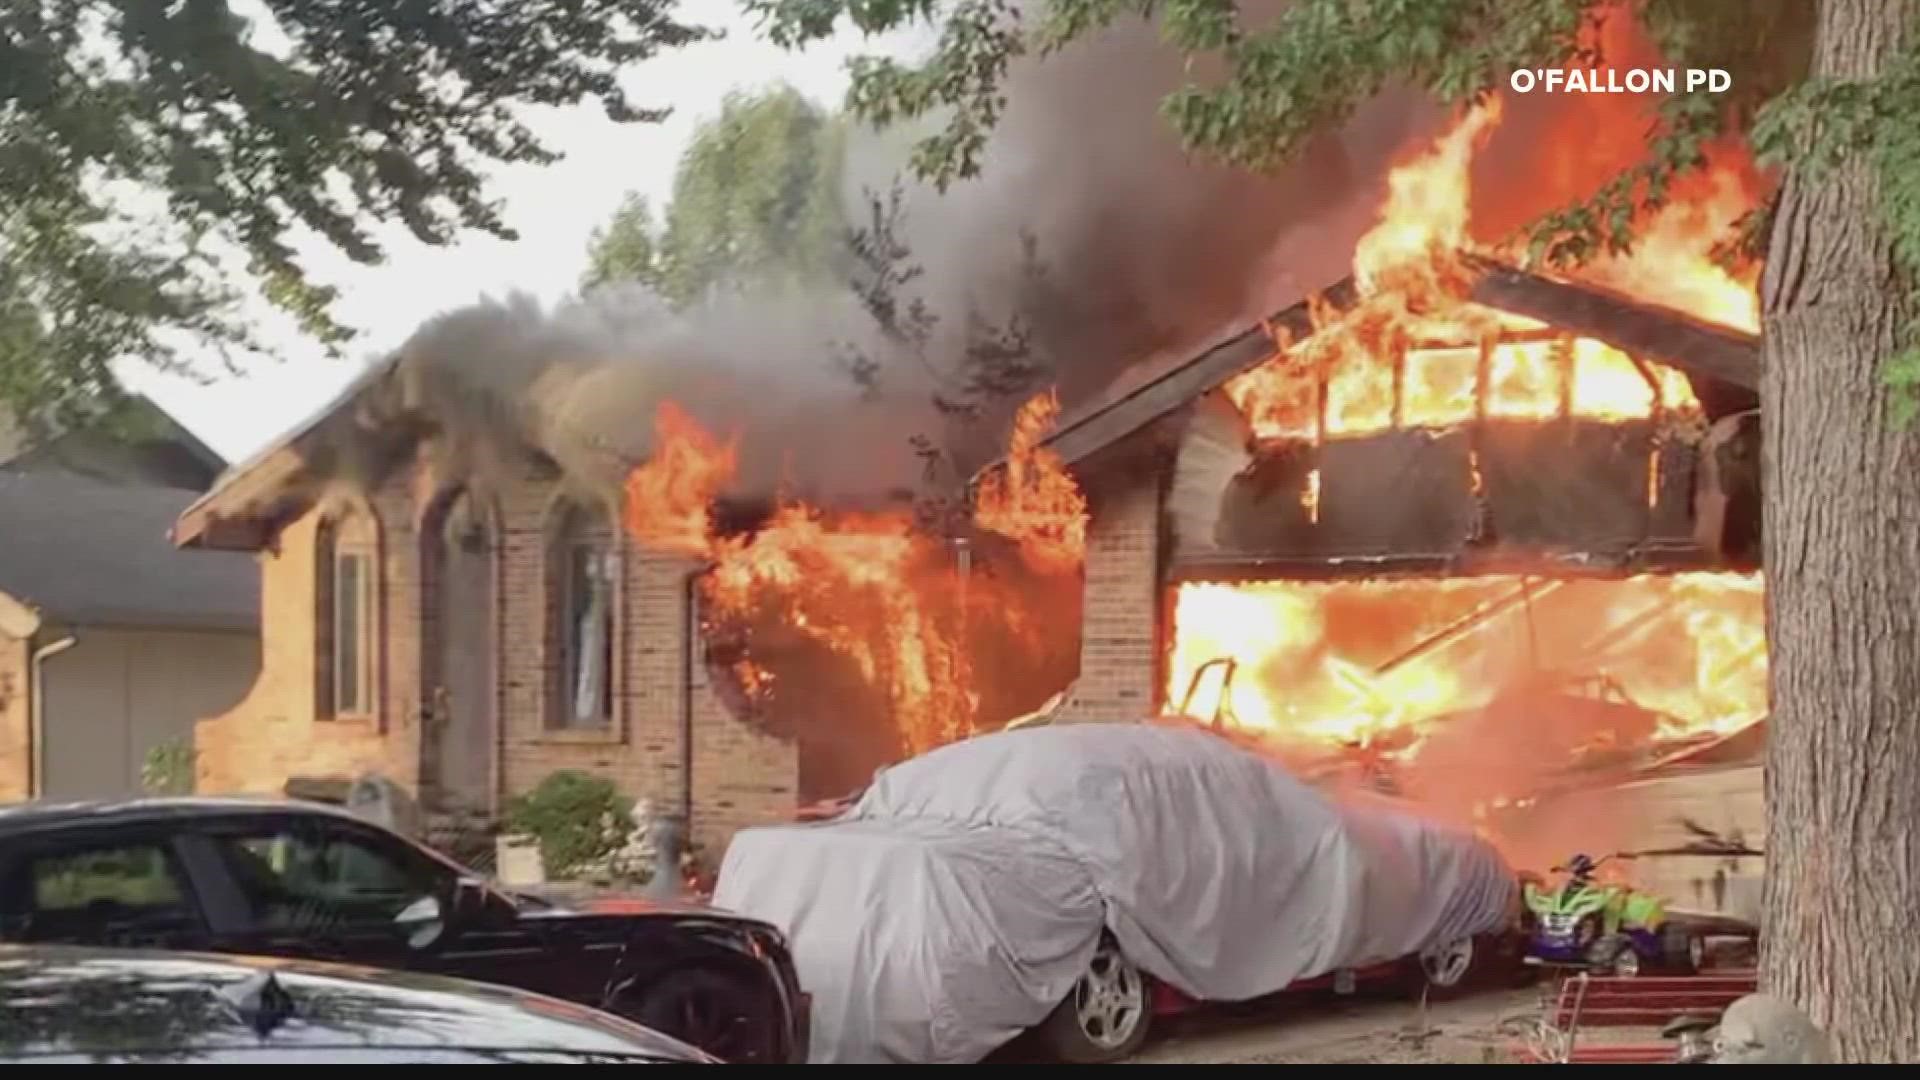 One resident and three first responders were injured in a house fire in St. Charles County near St. Peters Tuesday morning.